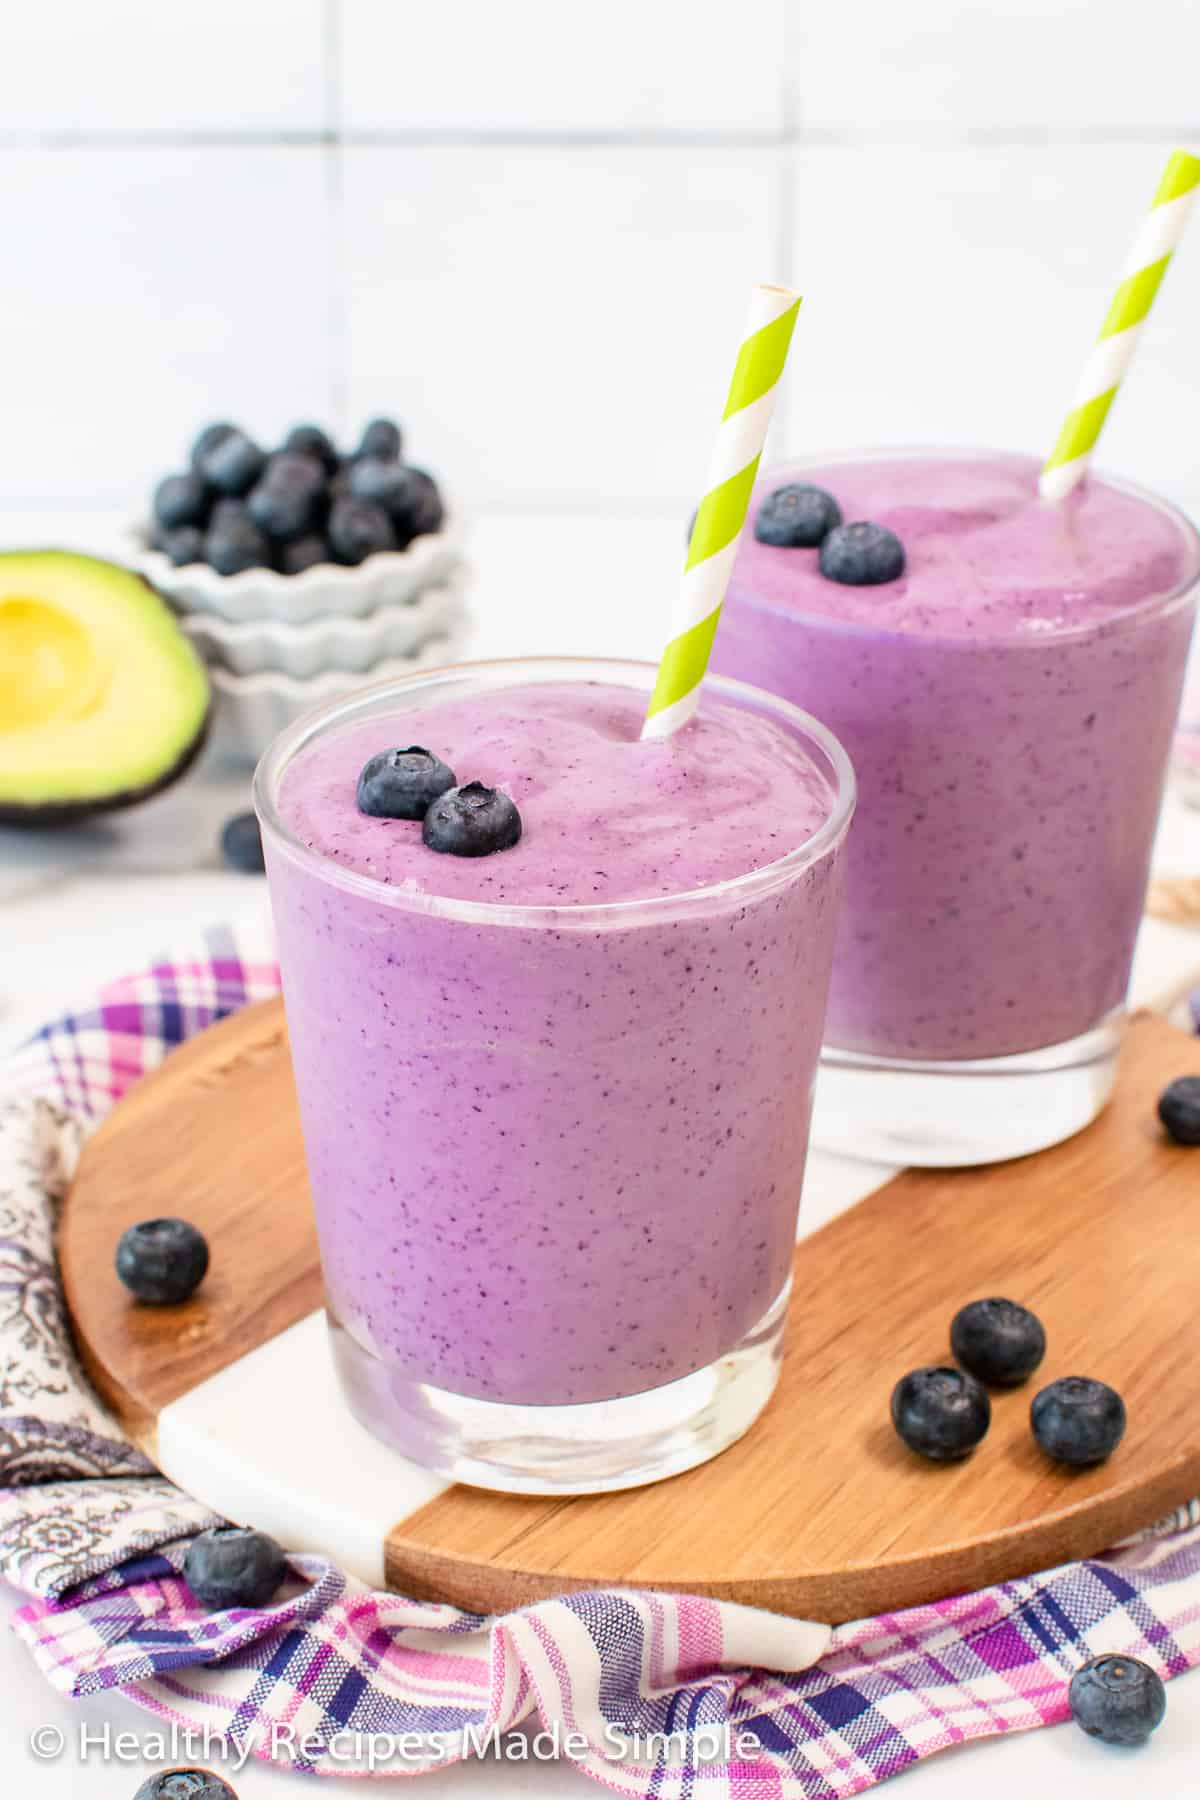 Blueberry avocado smoothie in a clear glass with a green and white straw.